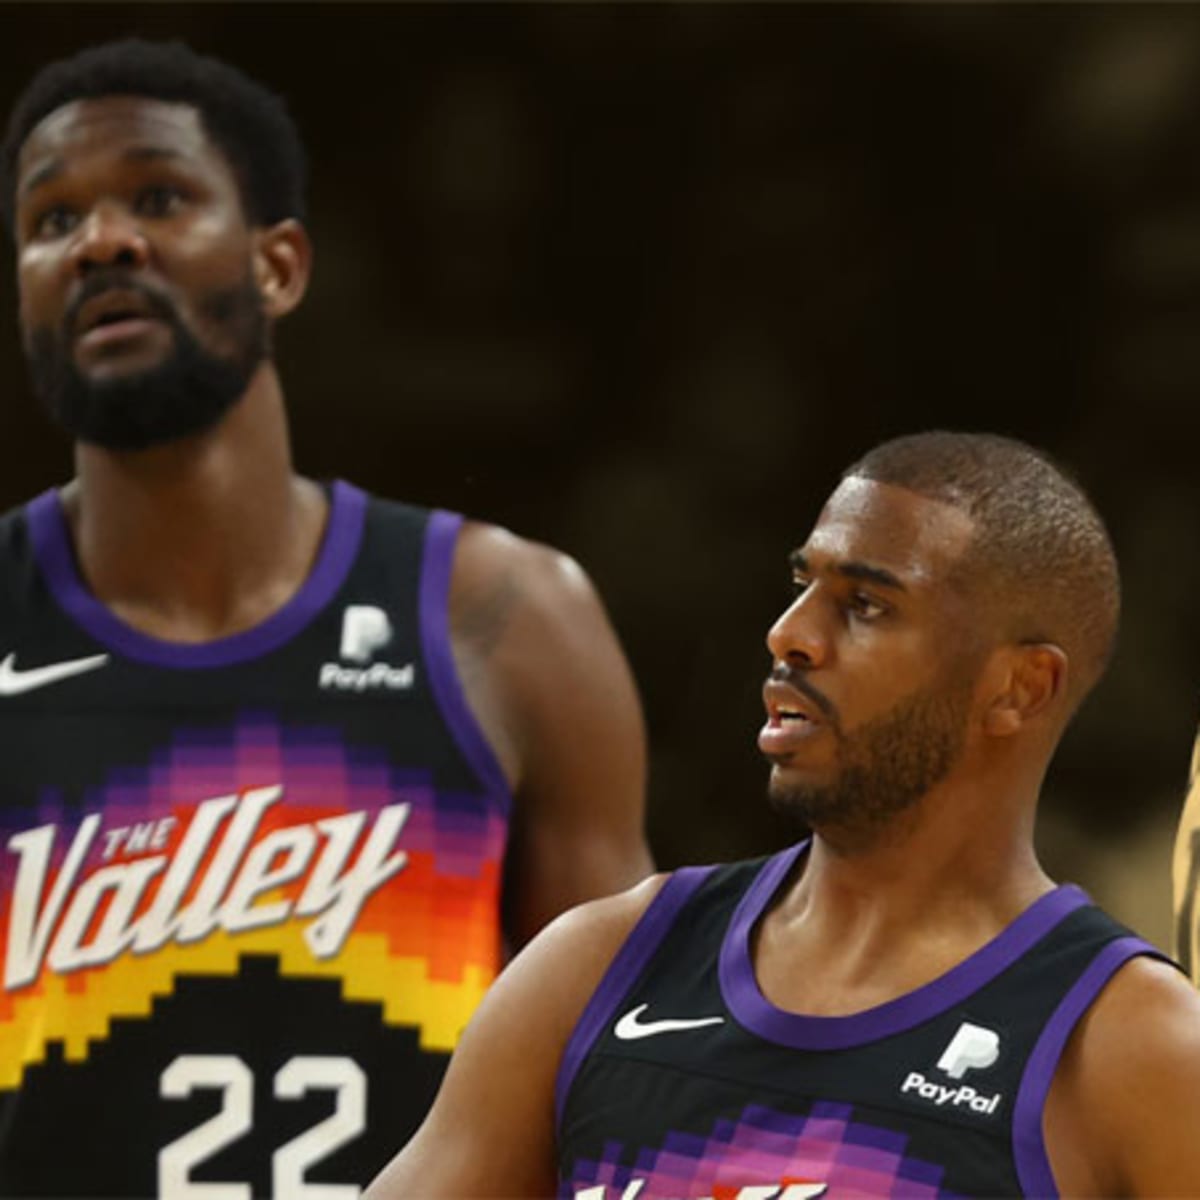 Suns' Deandre Ayton: Chris Paul 'was the best thing that happened